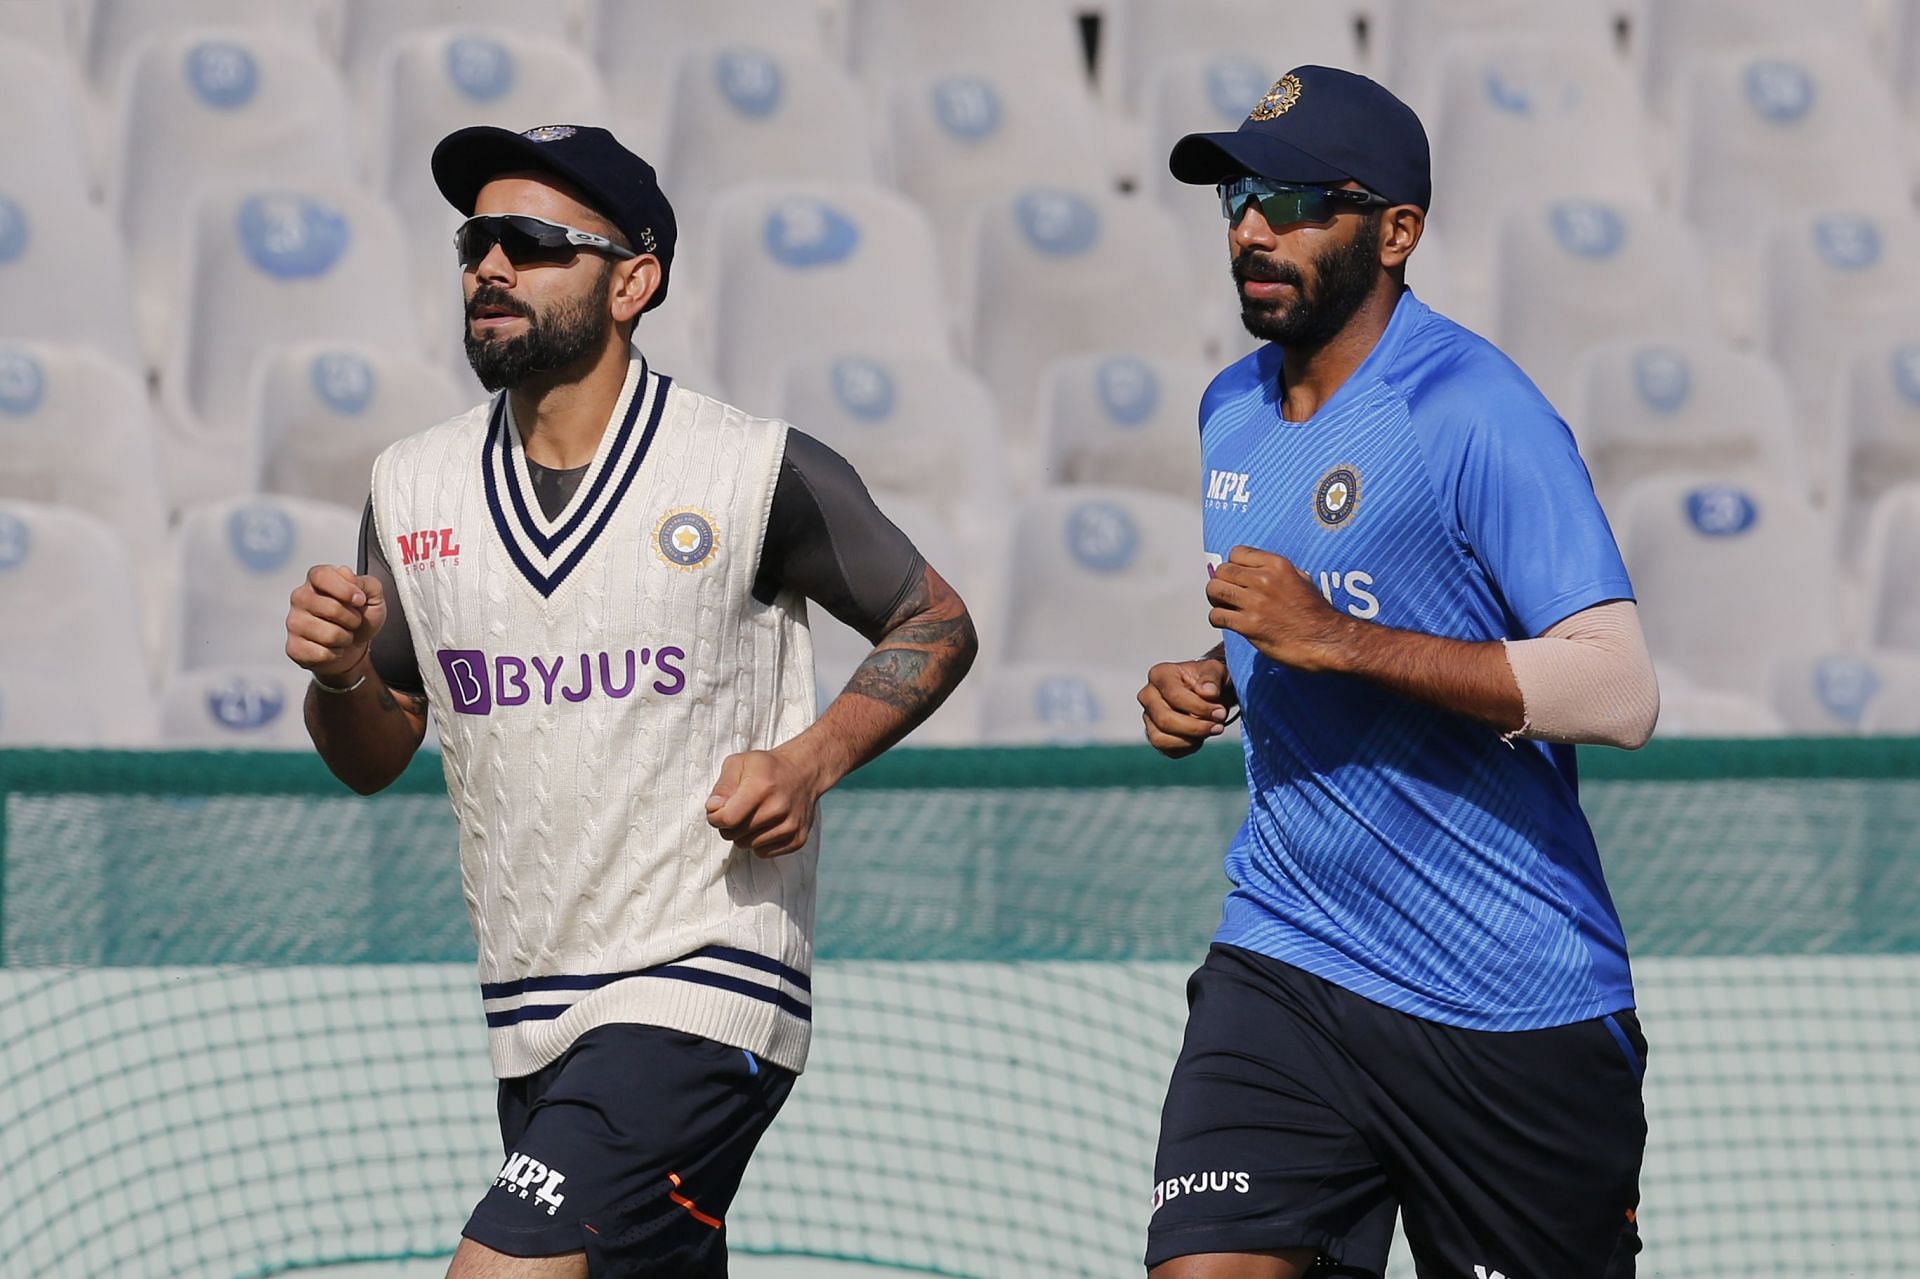 Enter caption Enter caption Enter caption Virat Kohli (L) and Jasprit Bumrah (R) during a training session in Mohali [Credits: BCCI]